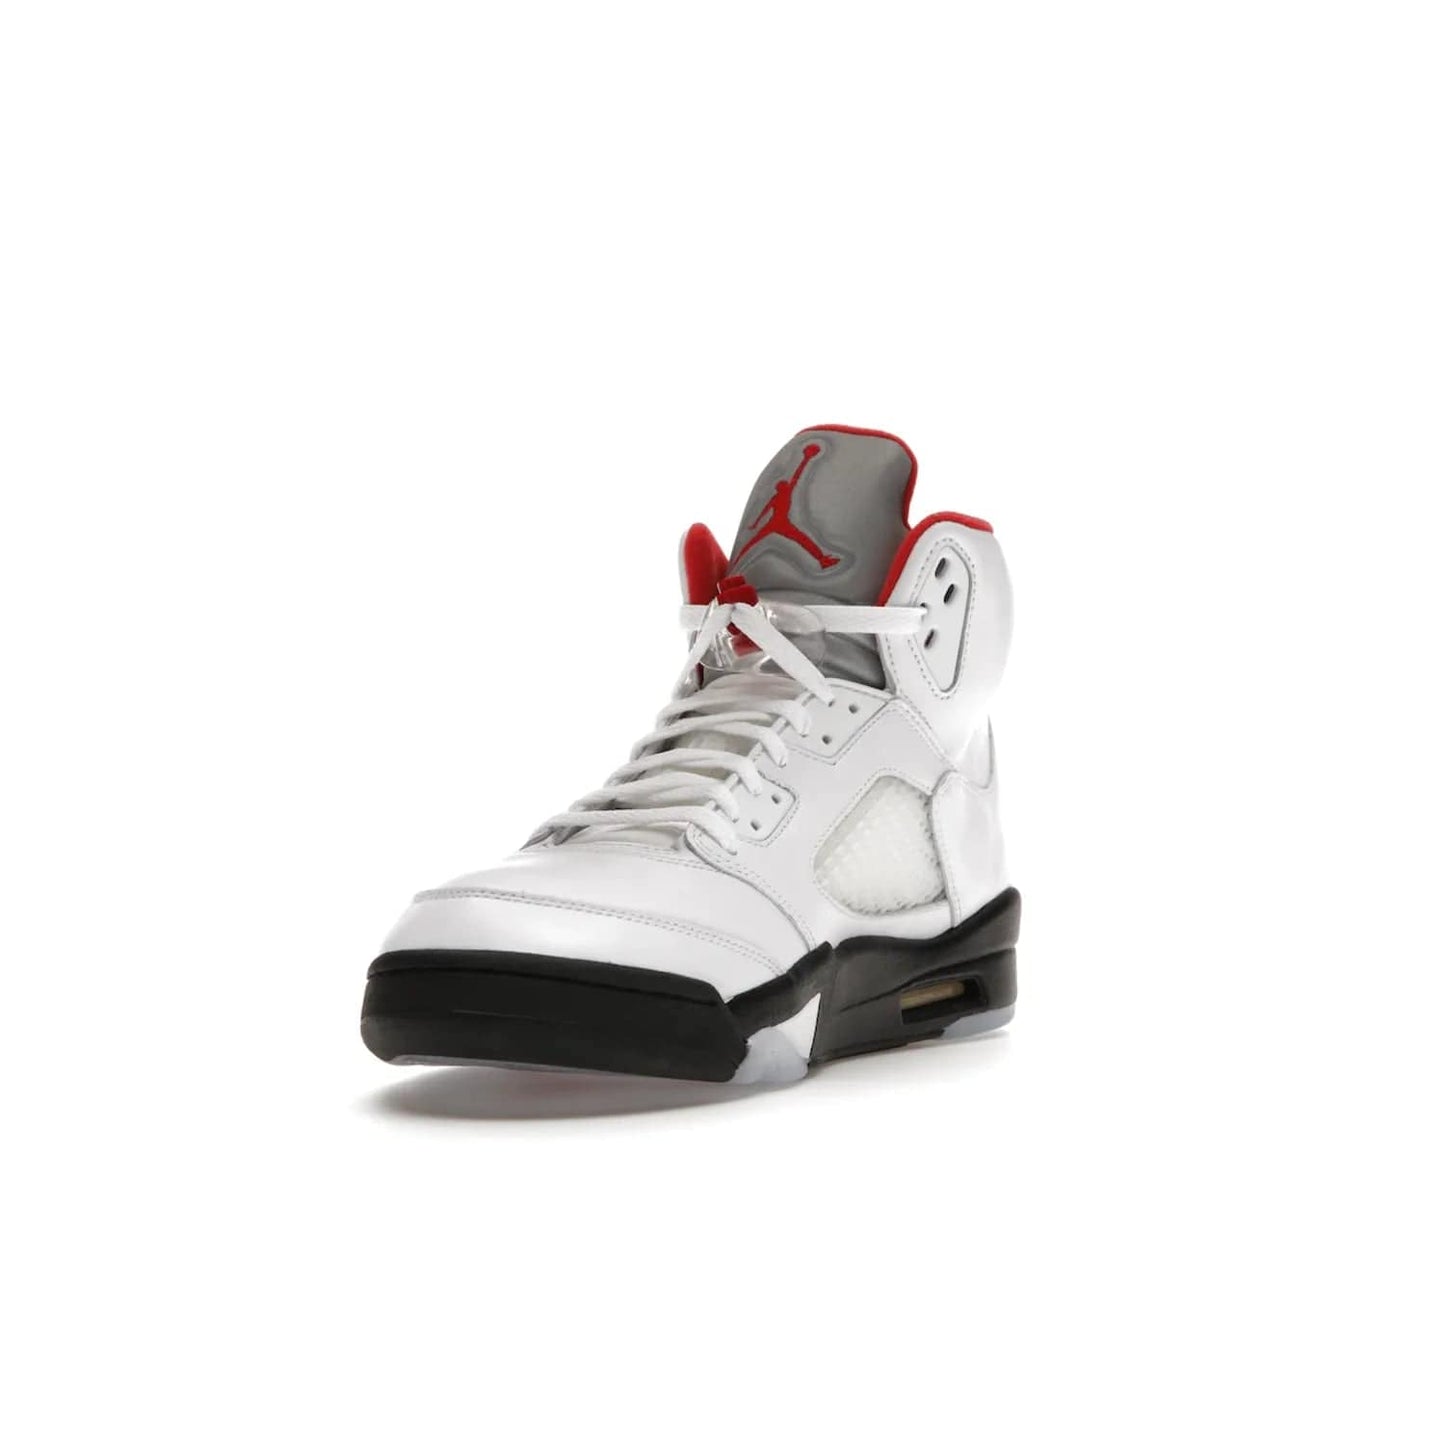 Jordan 5 Retro Fire Red Silver Tongue (2020) - Image 13 - Only at www.BallersClubKickz.com - Experience classic styling with the Jordan 5 Retro Fire Red Silver Tongue (2020). Features a white leather upper, 3M reflective tongue, midsole colorblocking, and an icy translucent outsole. Now available, upgrade your shoe collection today.